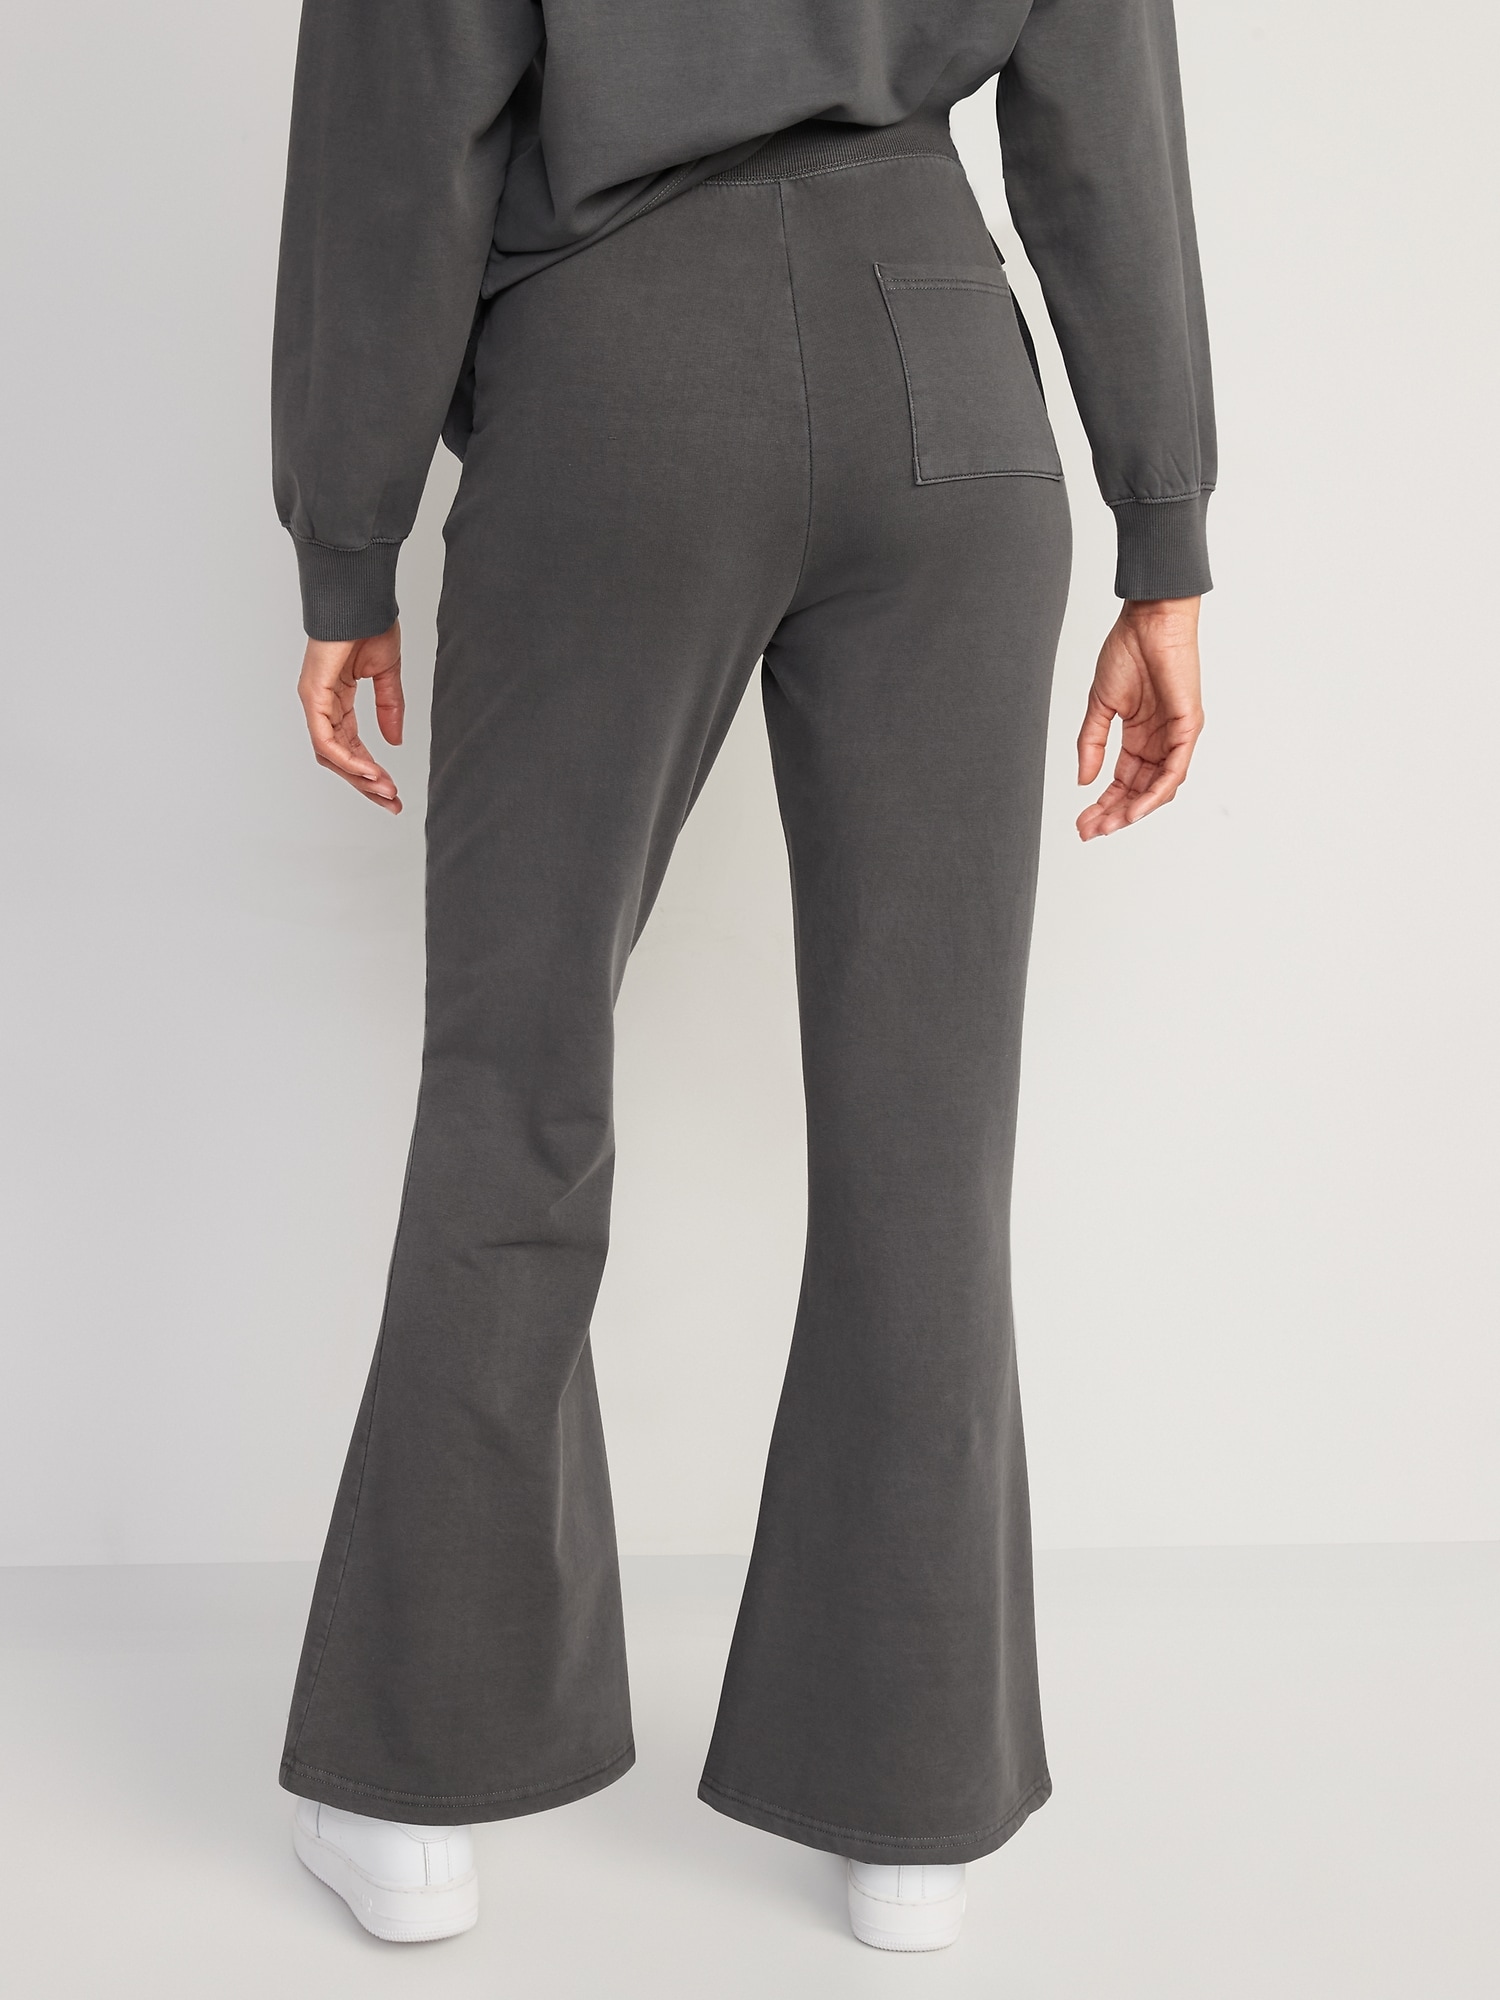 Extra High-Waisted Snuggly Fleece Flare Sweatpants for Women | Old Navy